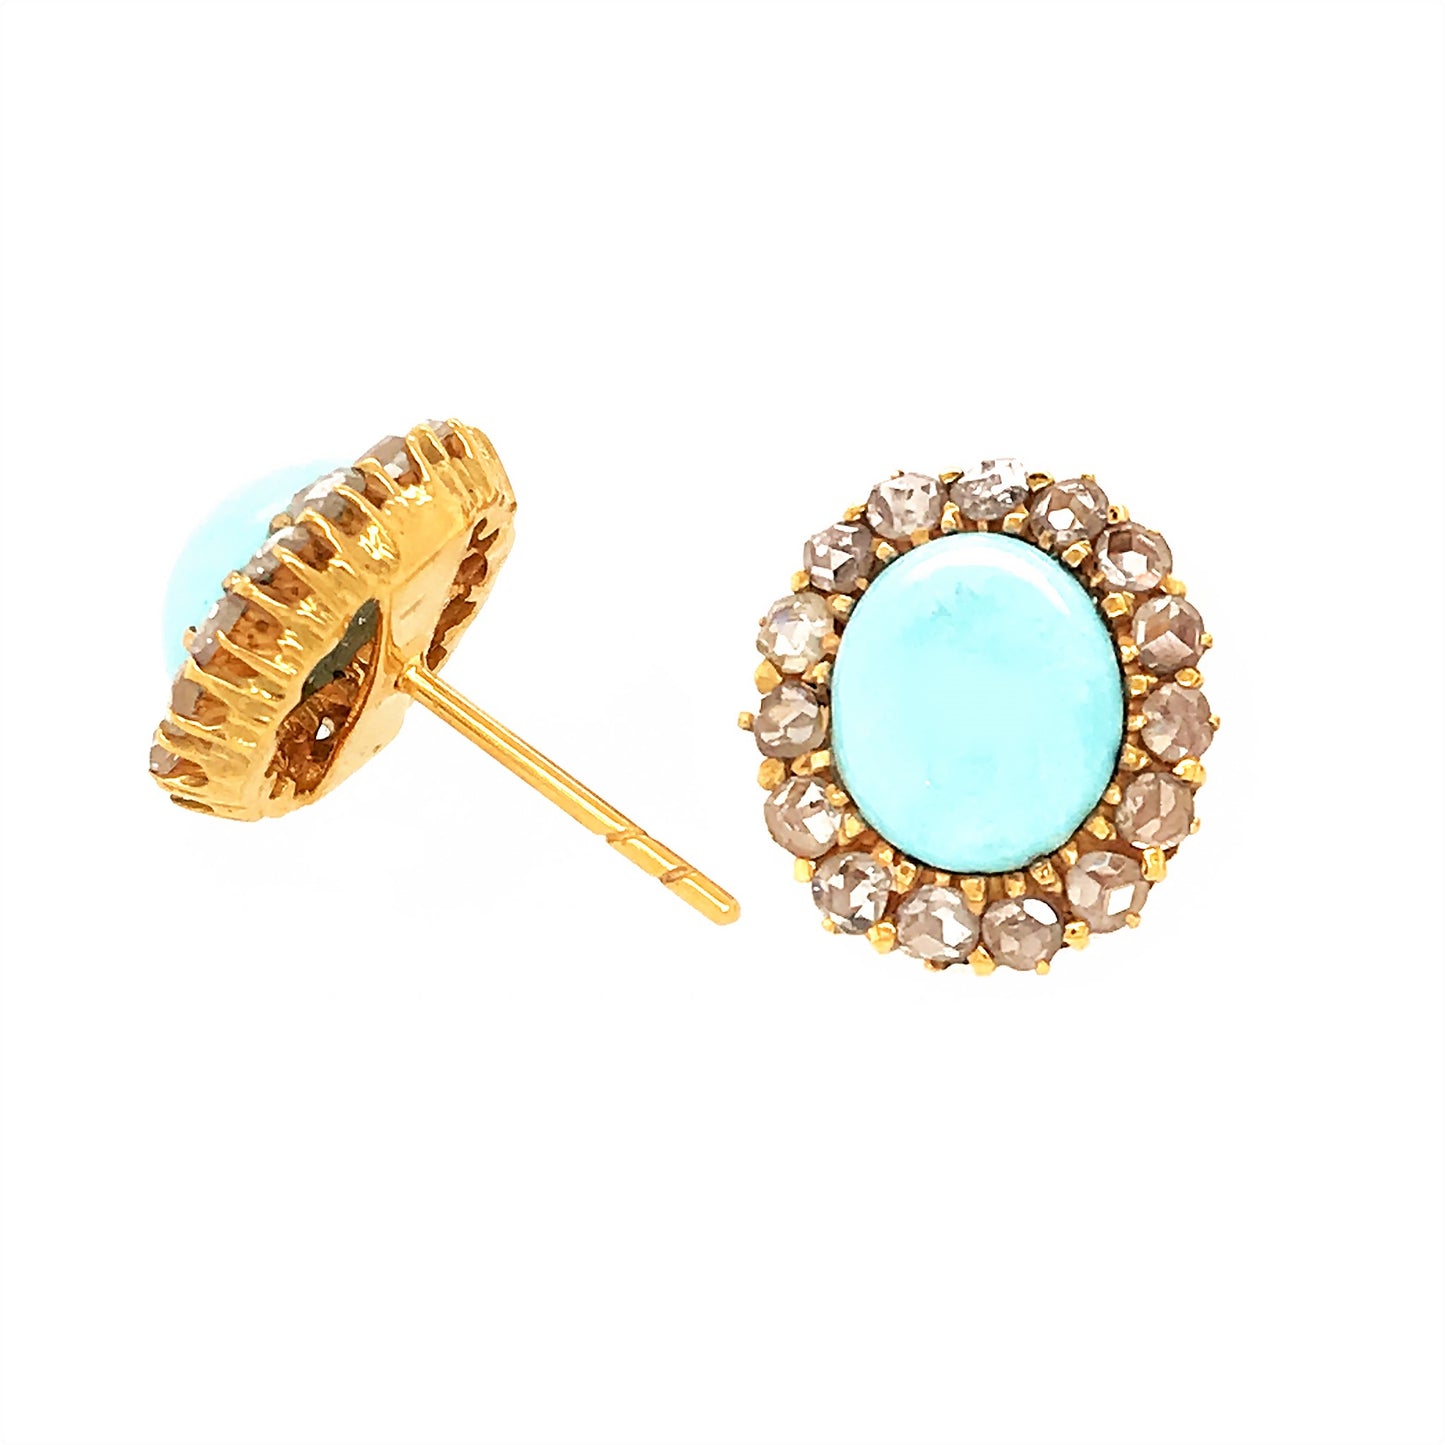 Estate 18k Yellow Gold  Turquoise and Rough Cut Diamond Earrings